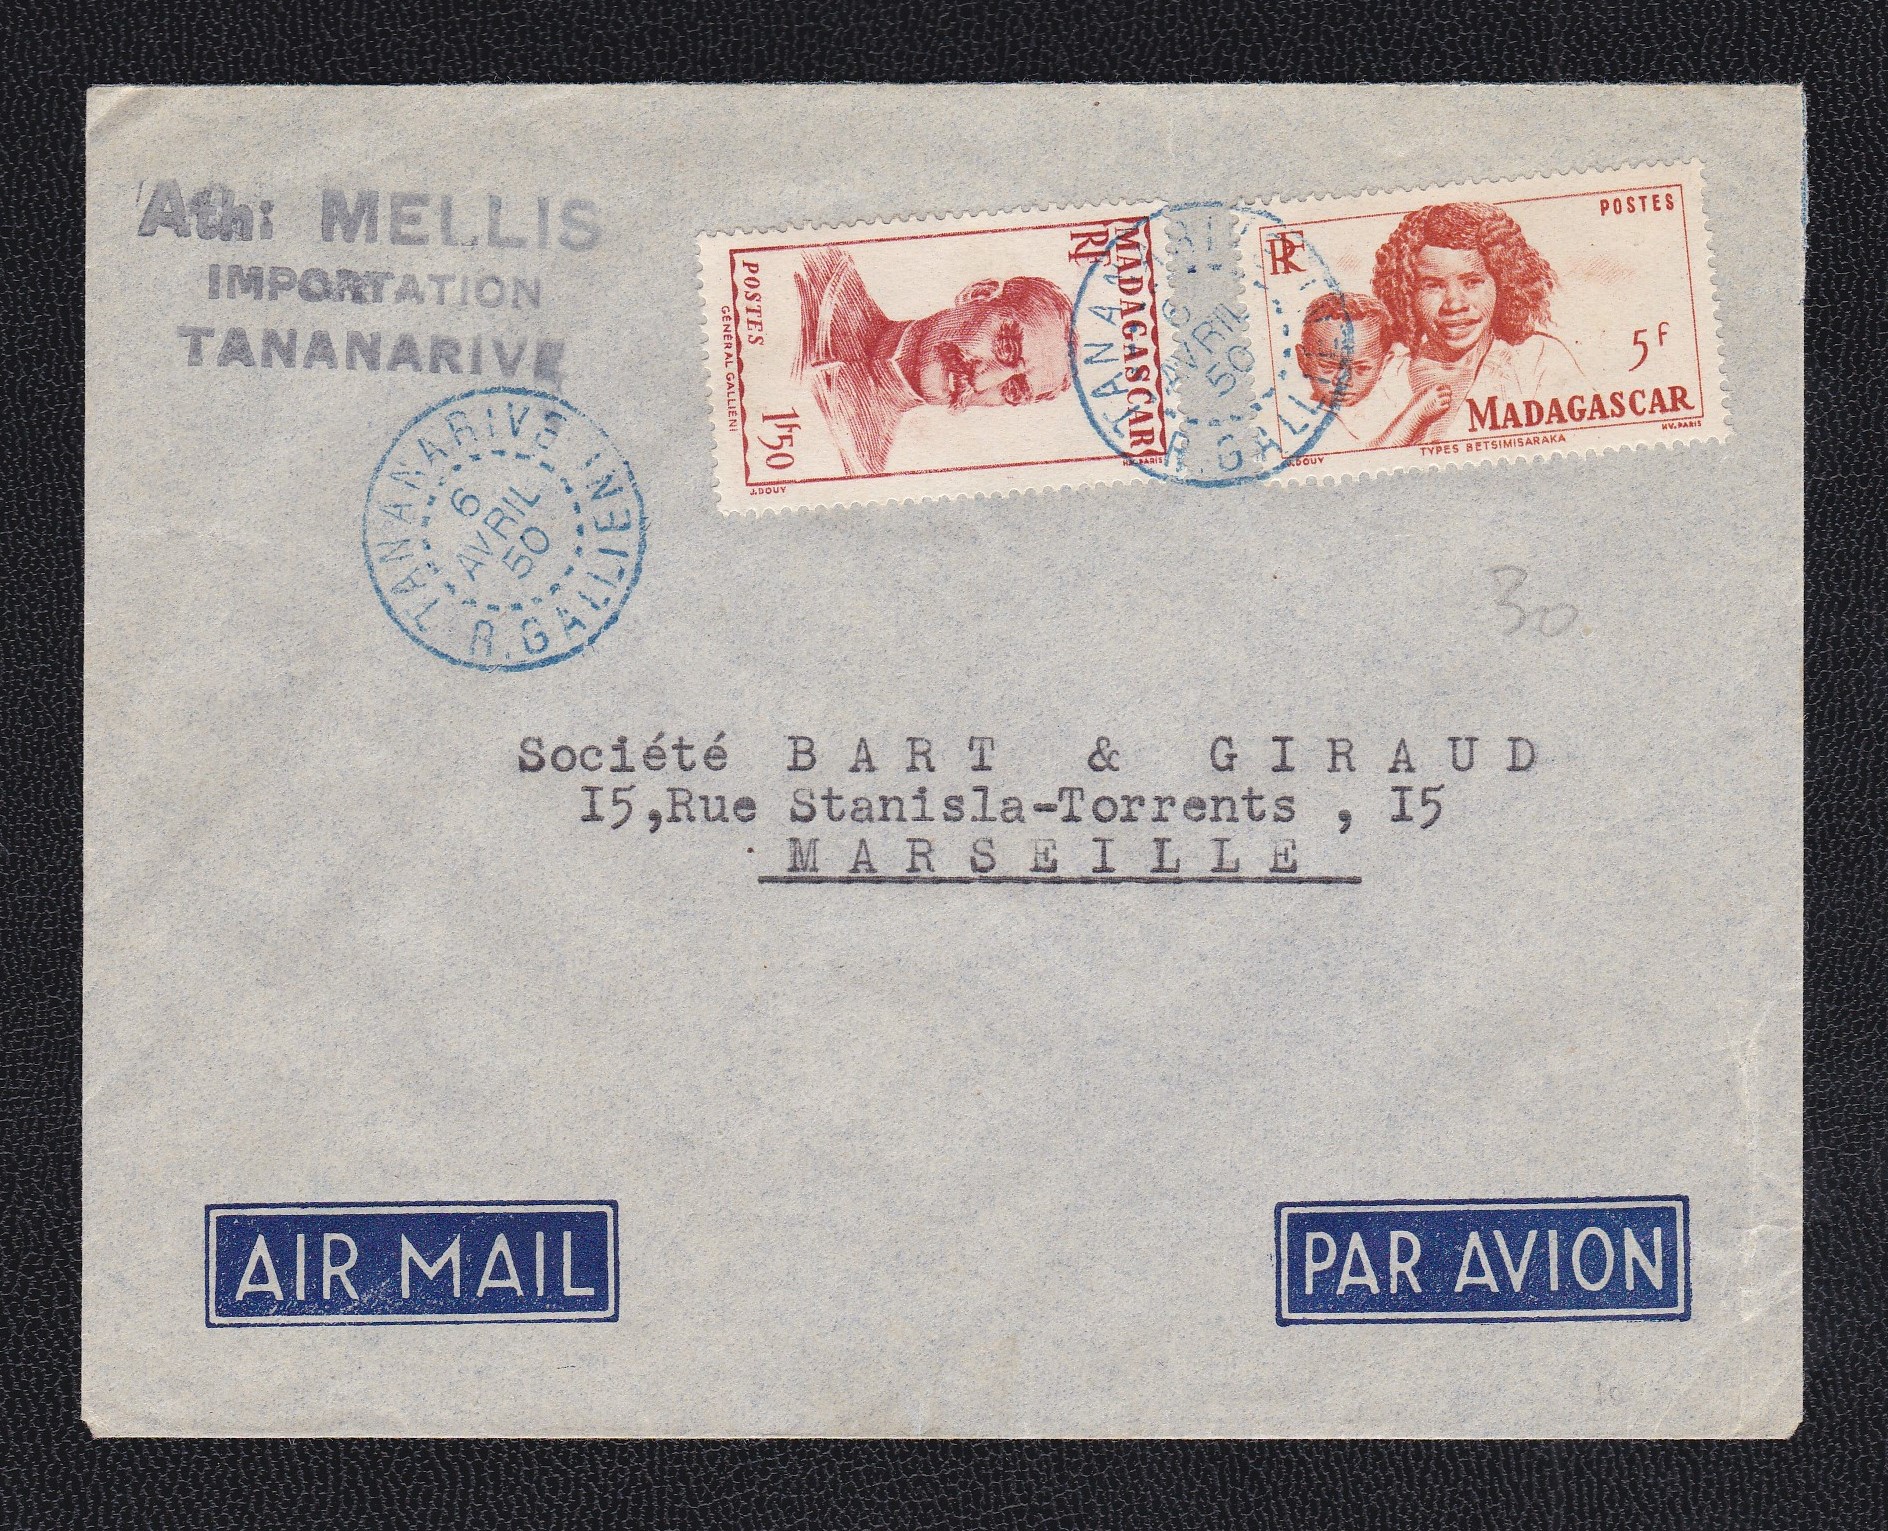 French Colonies Madagascar 1950 Animal env, commercial, Tanarive to Marseille